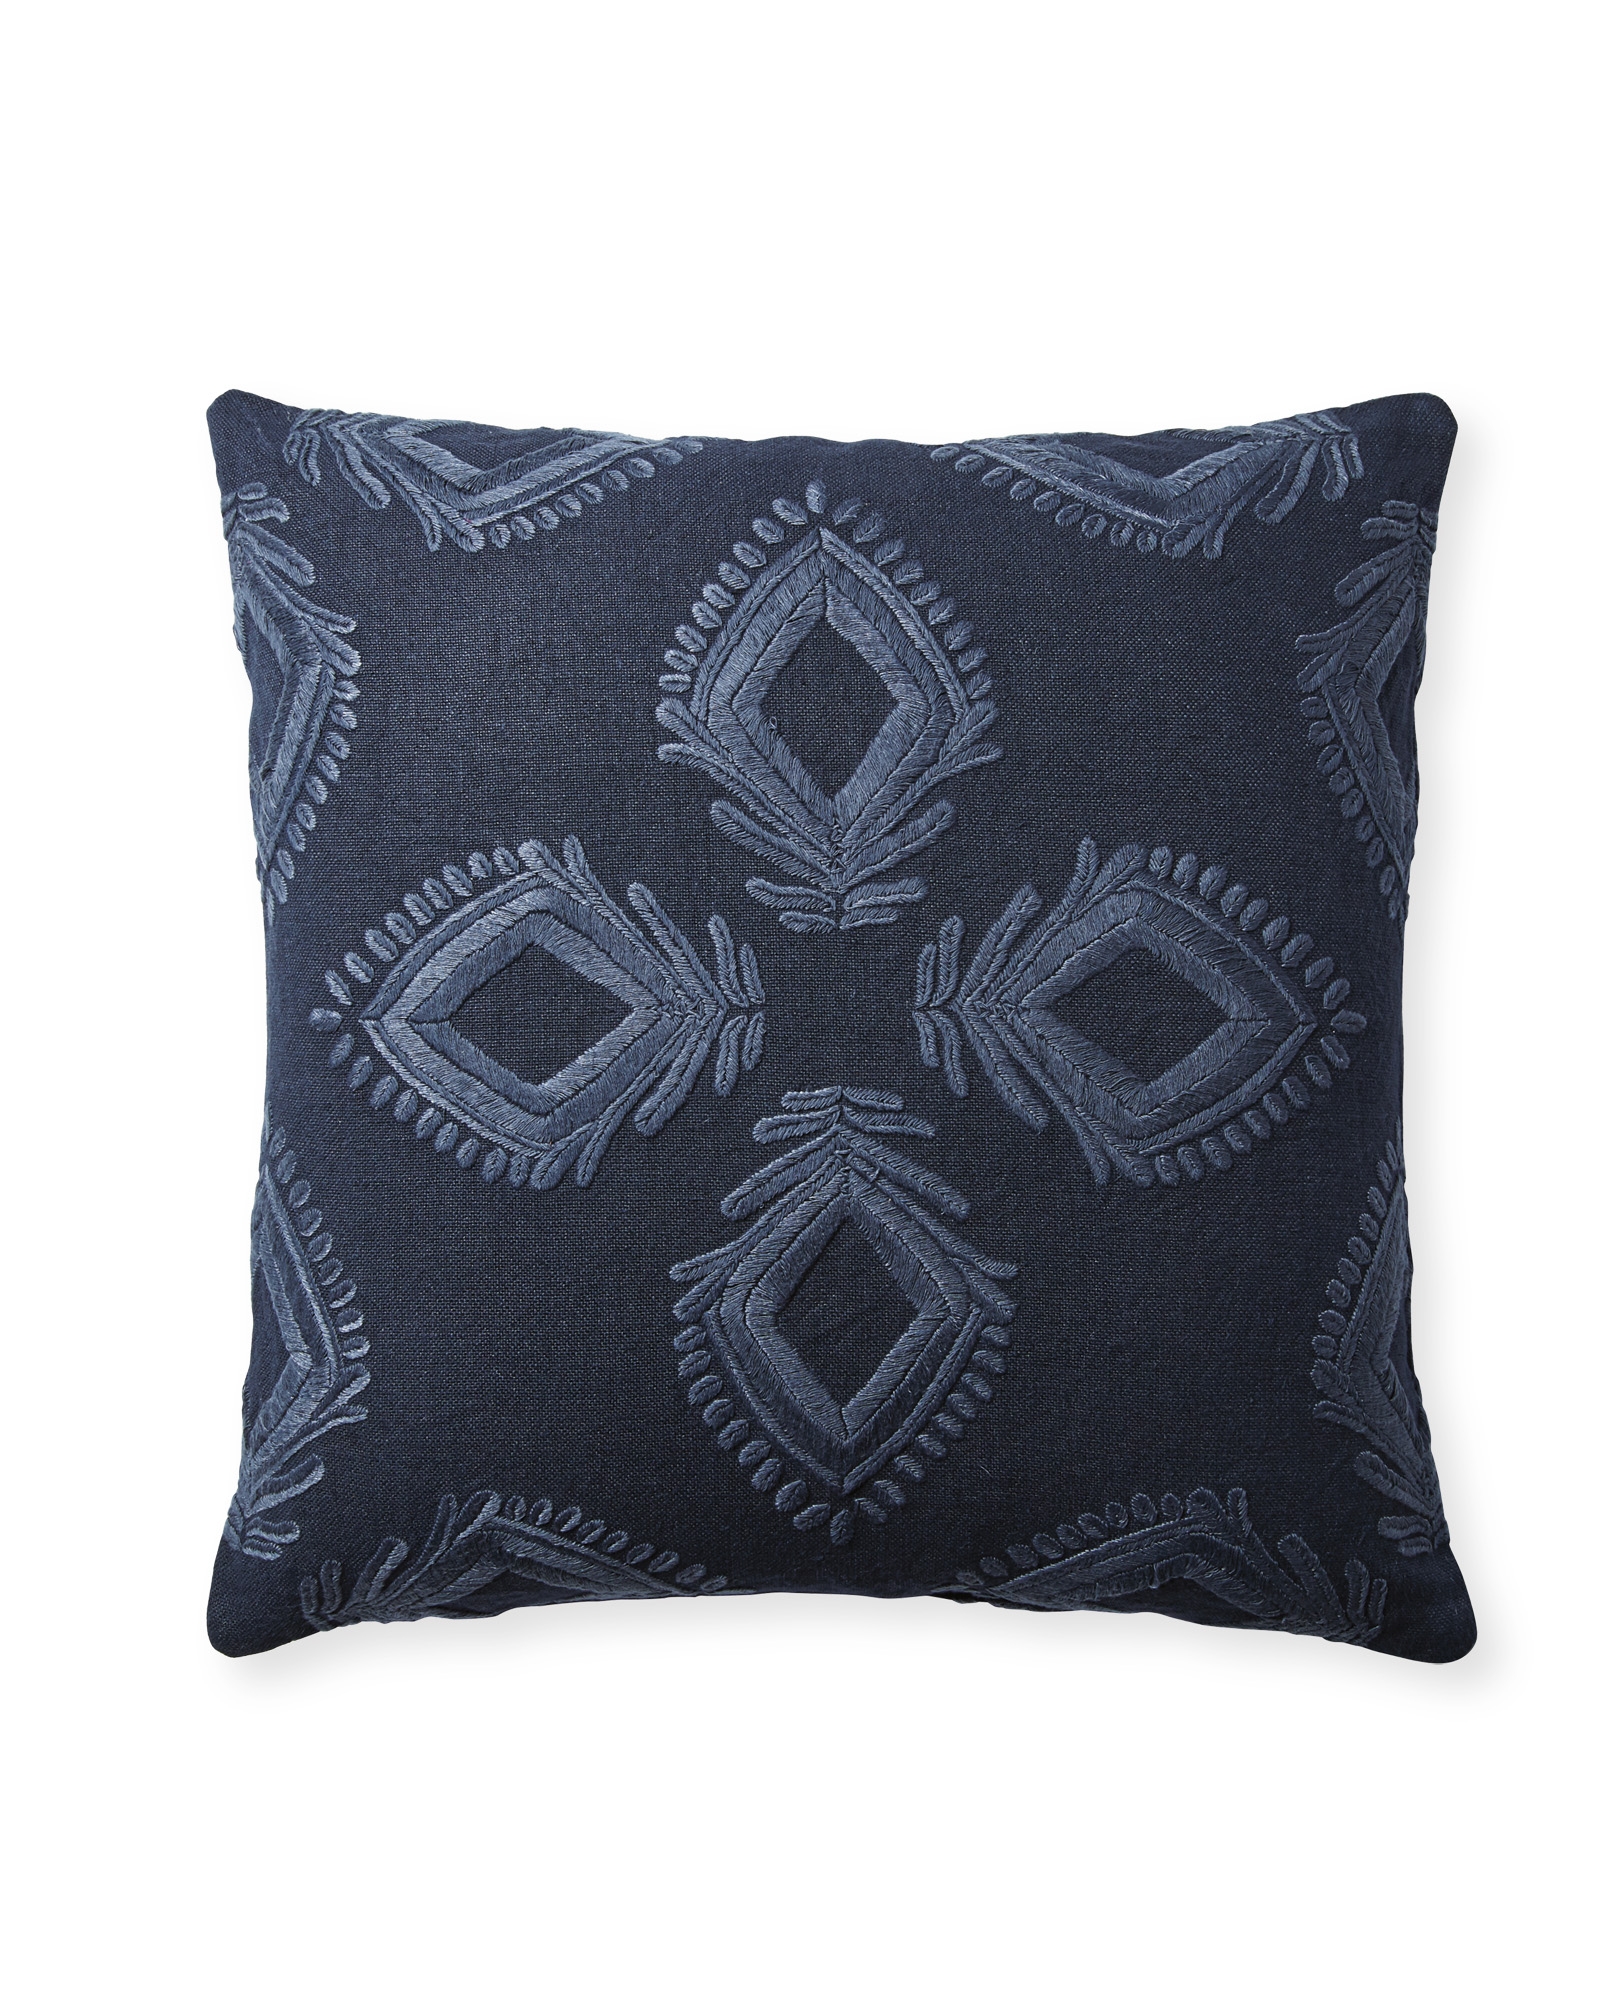 Leighton Pillow Cove r- Midnight - 24" x 24" - Insert Sold Separately - Image 0